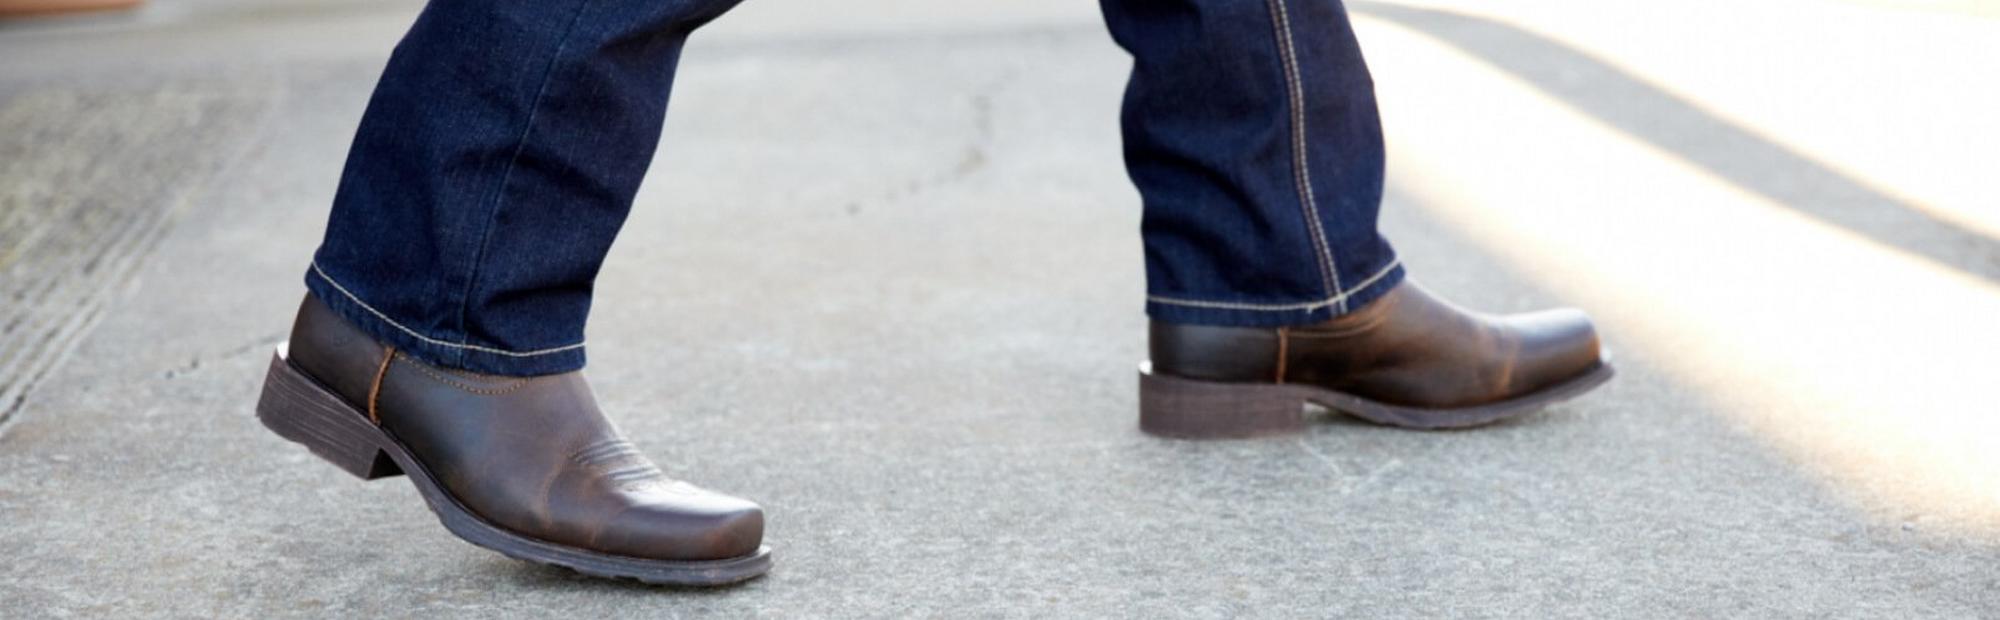 Blue Jeans with Cowboy Boots Relaxed Outfits For Men (5 ideas